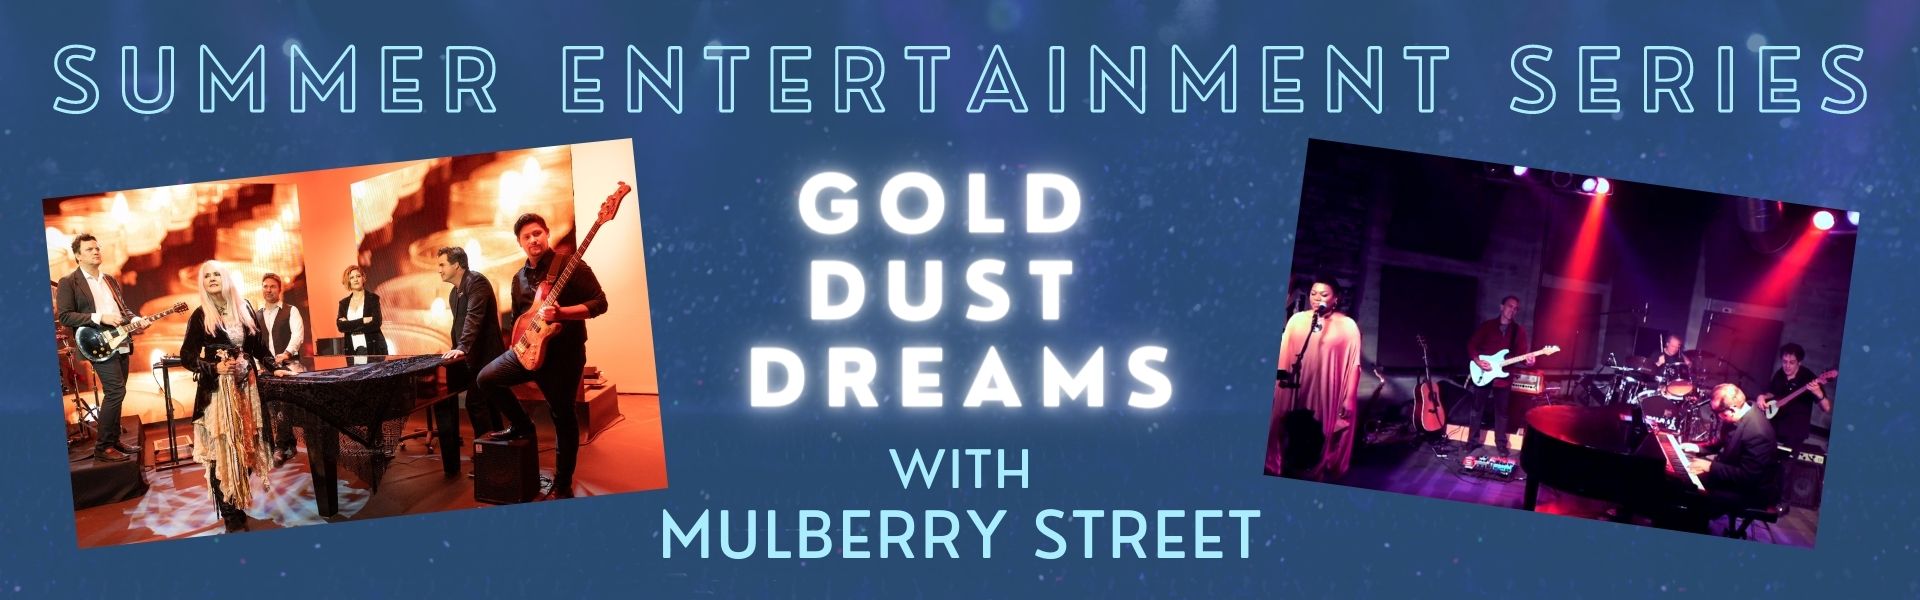 Summer Entertainment Series: Gold Dust Dreams with Mulberry Street